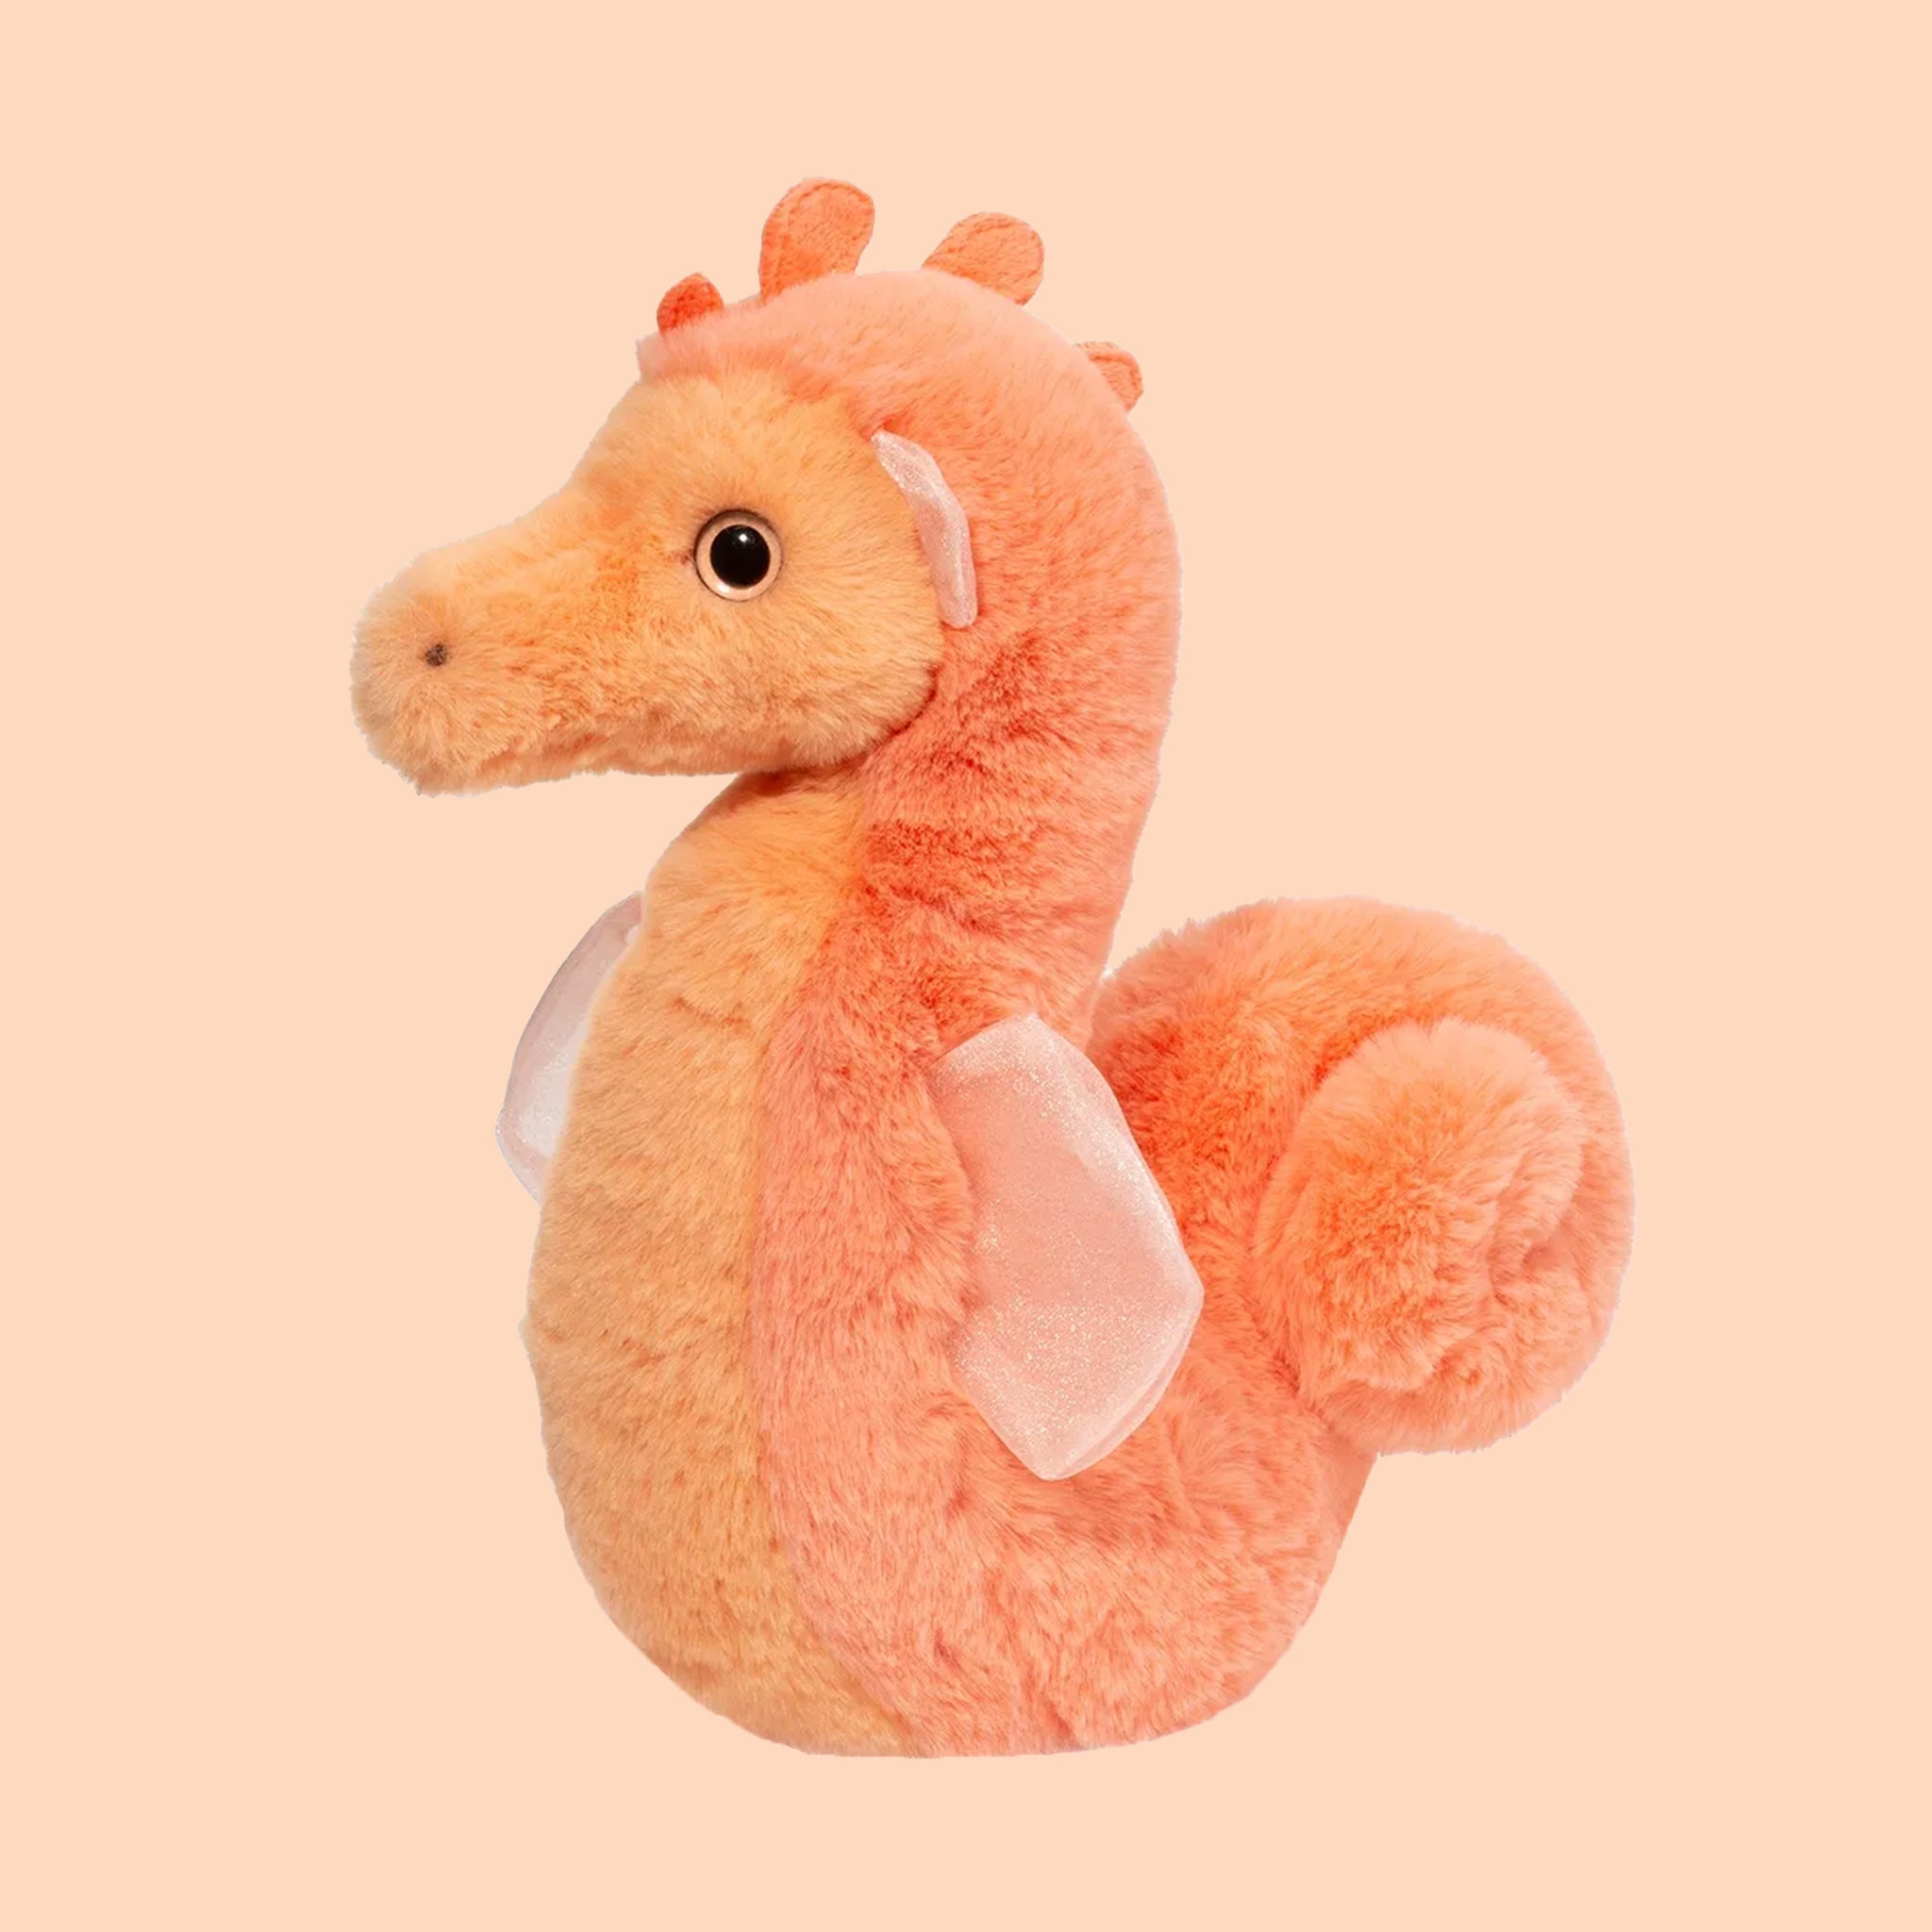 On a peachy background is an orange fuzzy seahorse shaped stuffed toy. 